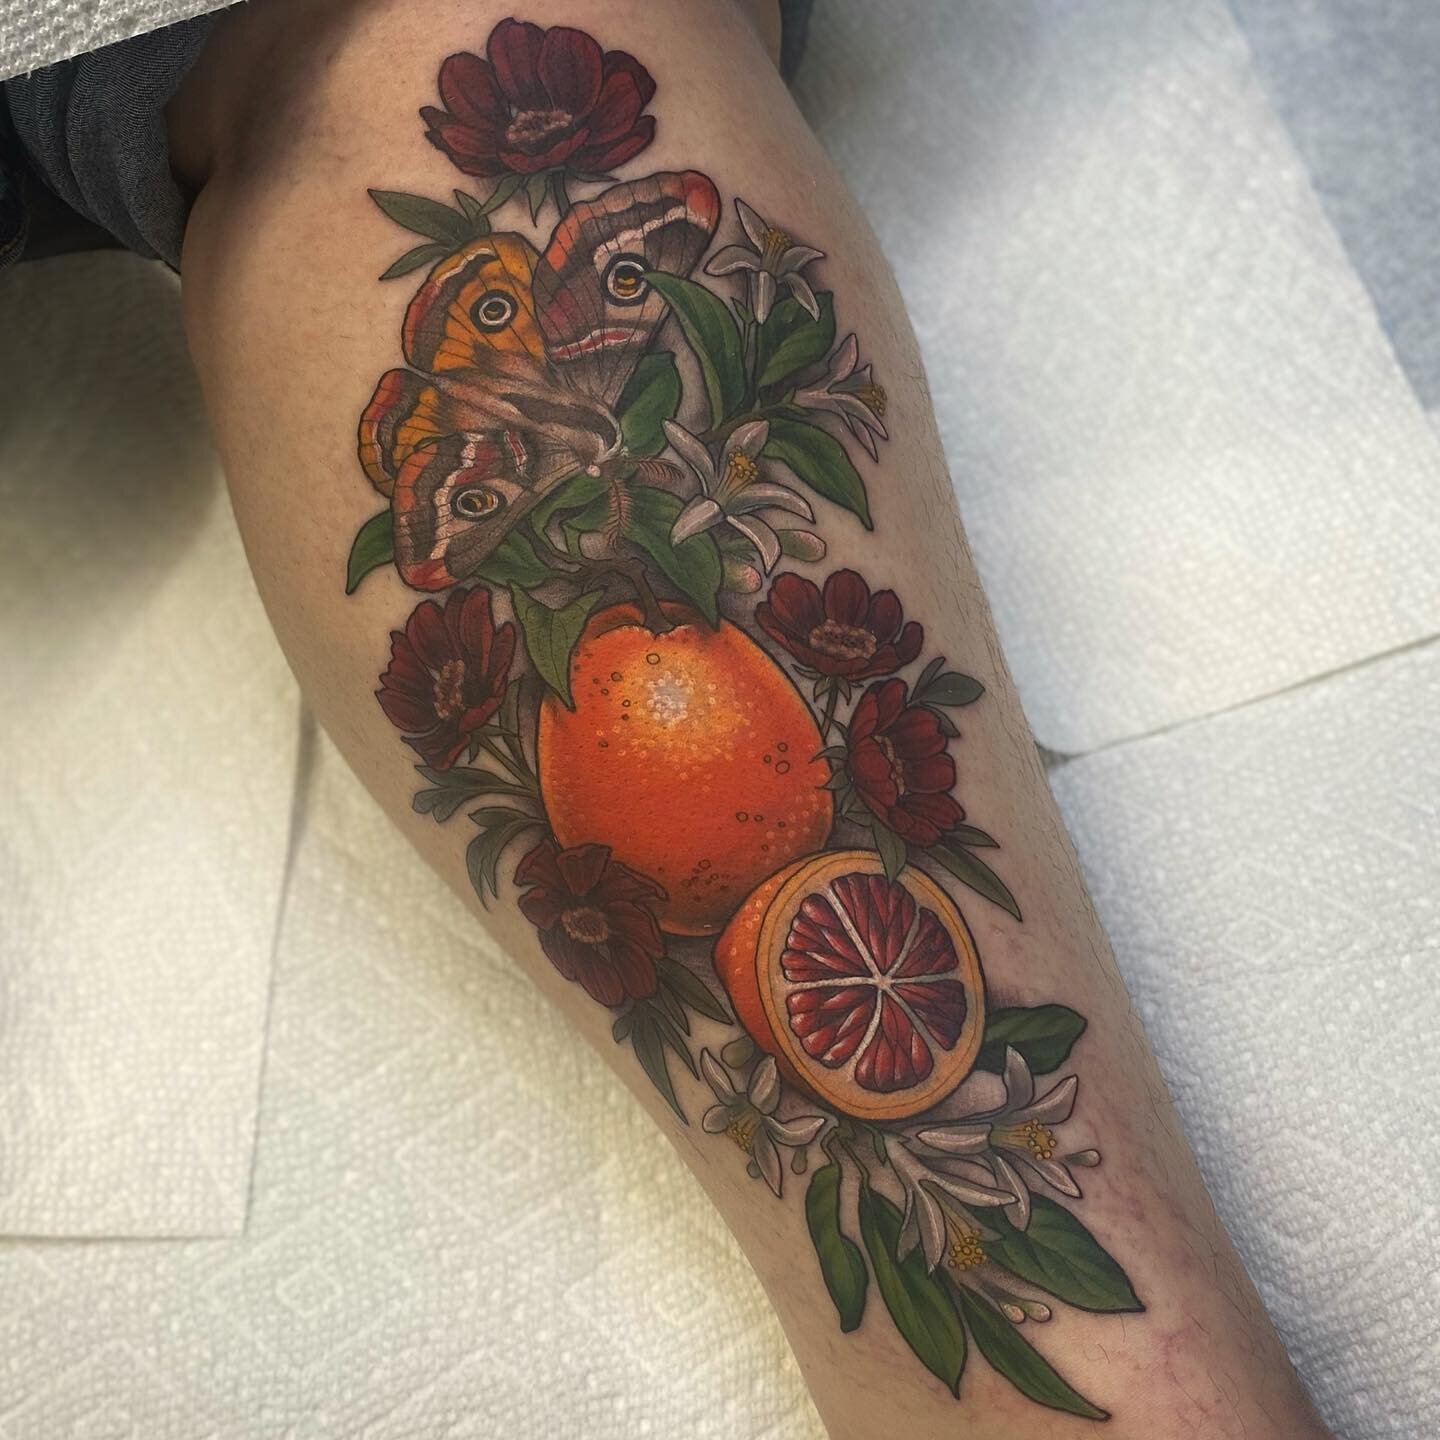 Emperor moth, blood oranges, and chocolate cosmos for Heidi! 🍊🍫🩸bold flavors, bold colors. Scroll for deets. Thanks Heidi!
*
Made @houndstoothtattoo 
*
#tattoo #botanicaltattoo #botanicalillustration #botanicalart #floraltattoo #mothtattoo #fruitt